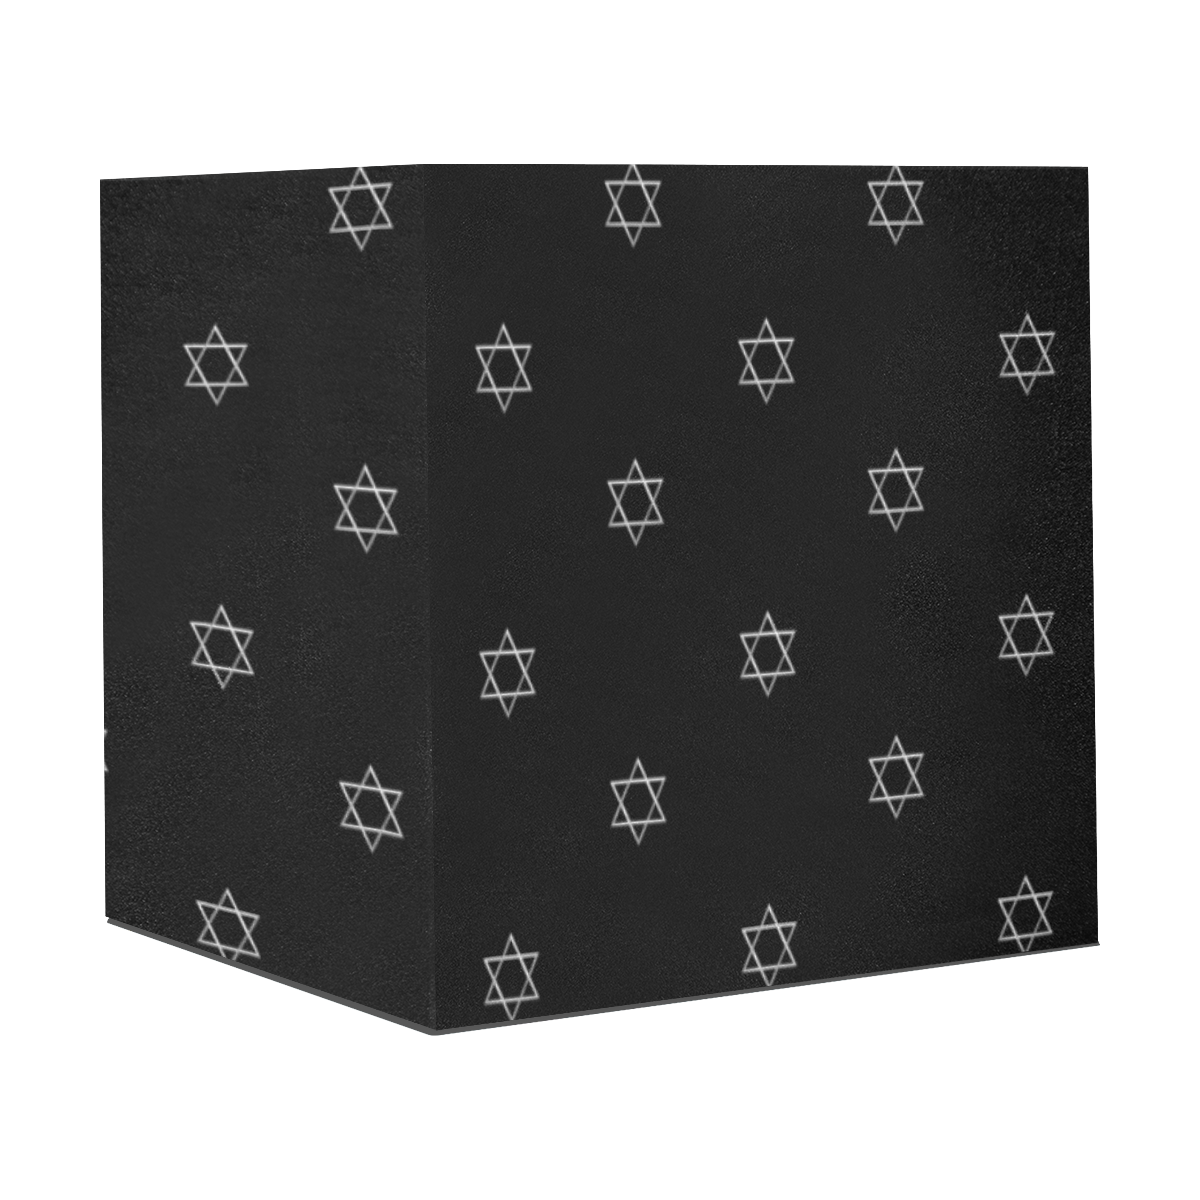 FAITH: Silver Star of David on Black Gift Wrapping Paper 58"x 23" (1 Roll)